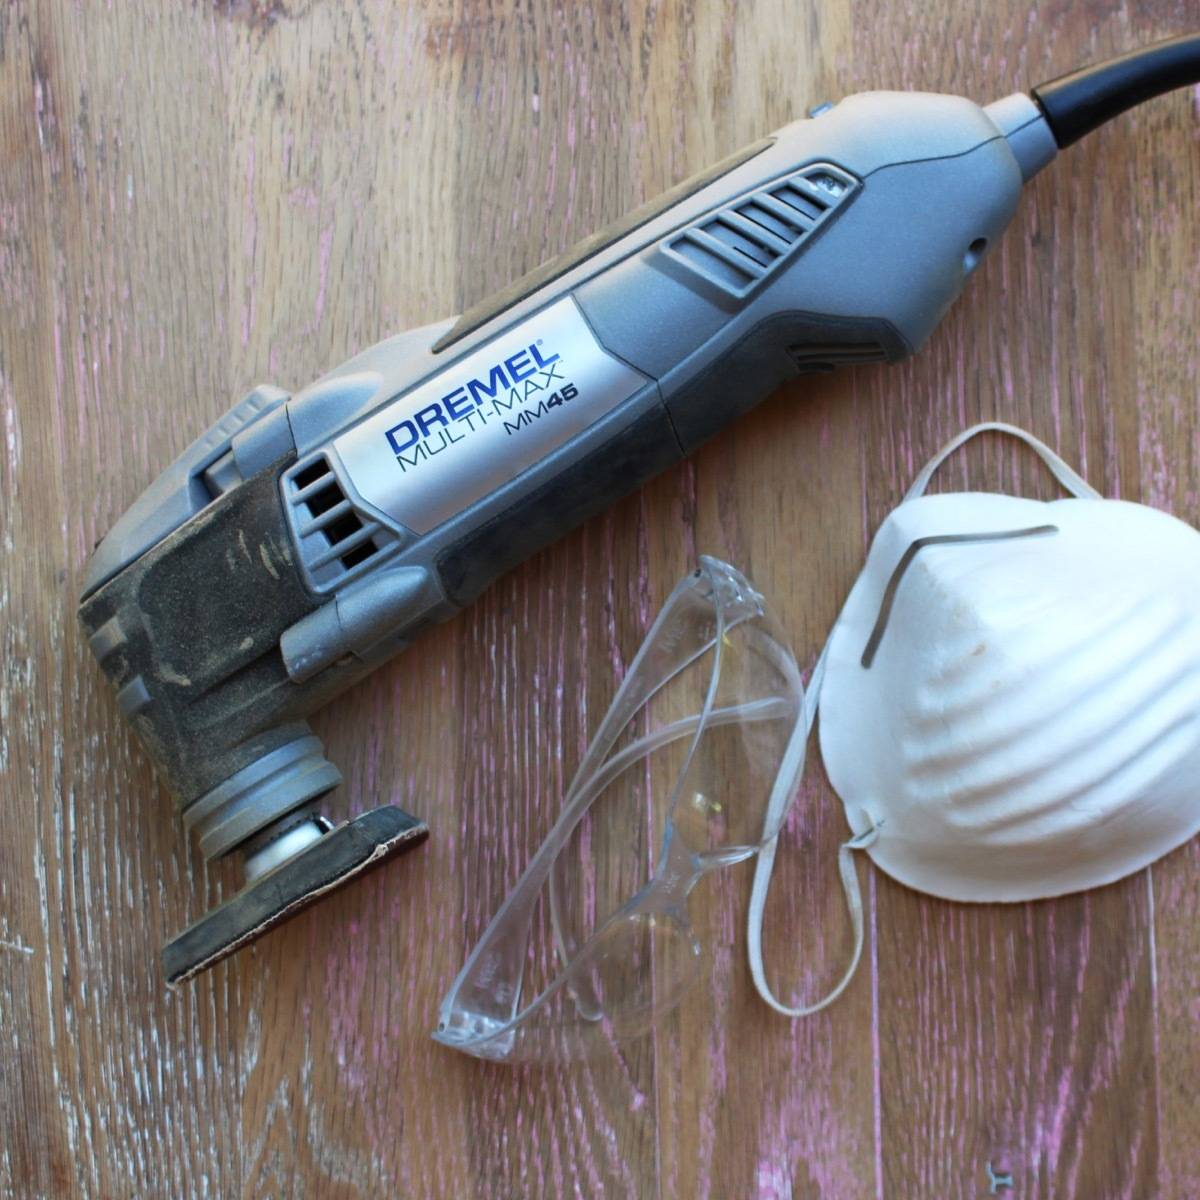 Did you know you can turn your Dremel® into a mini-sander?